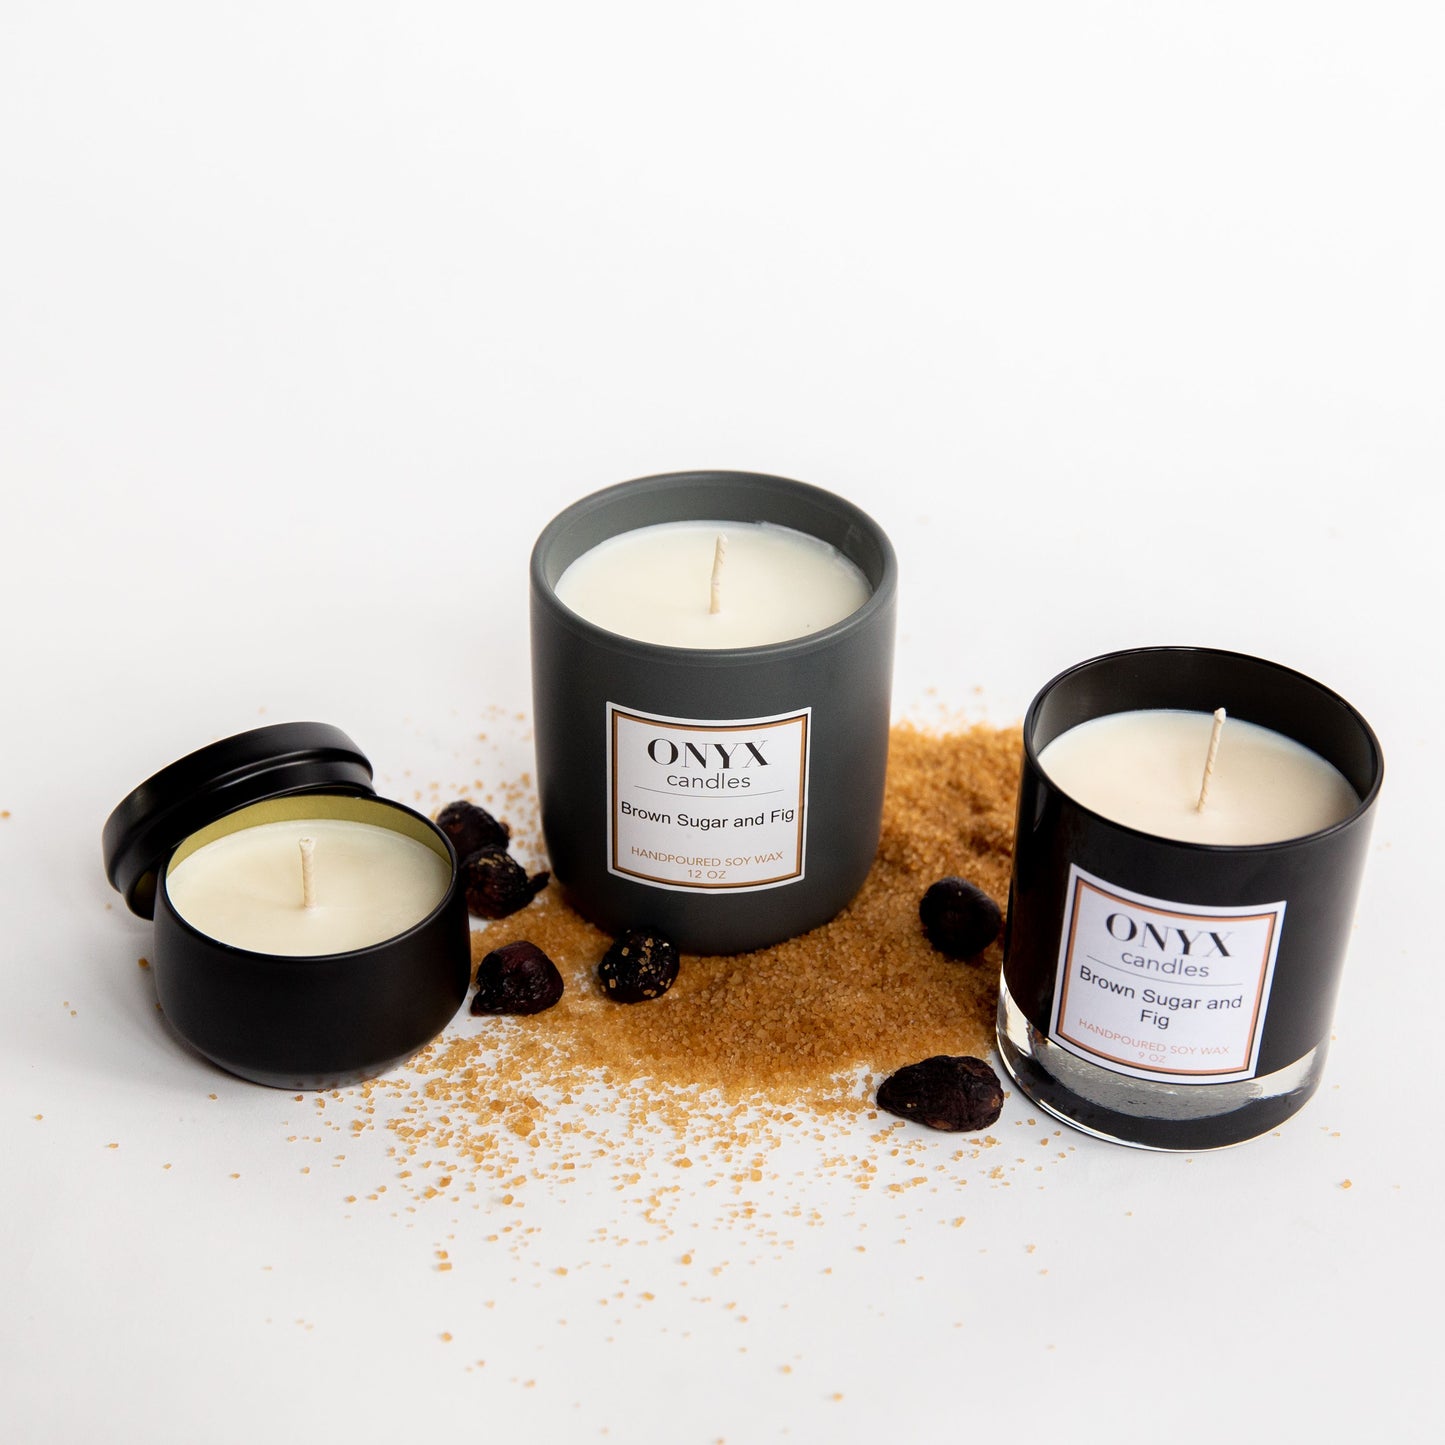 Pictured are three size varieties of Onyx candles in the scent of Brown Sugar and Fig